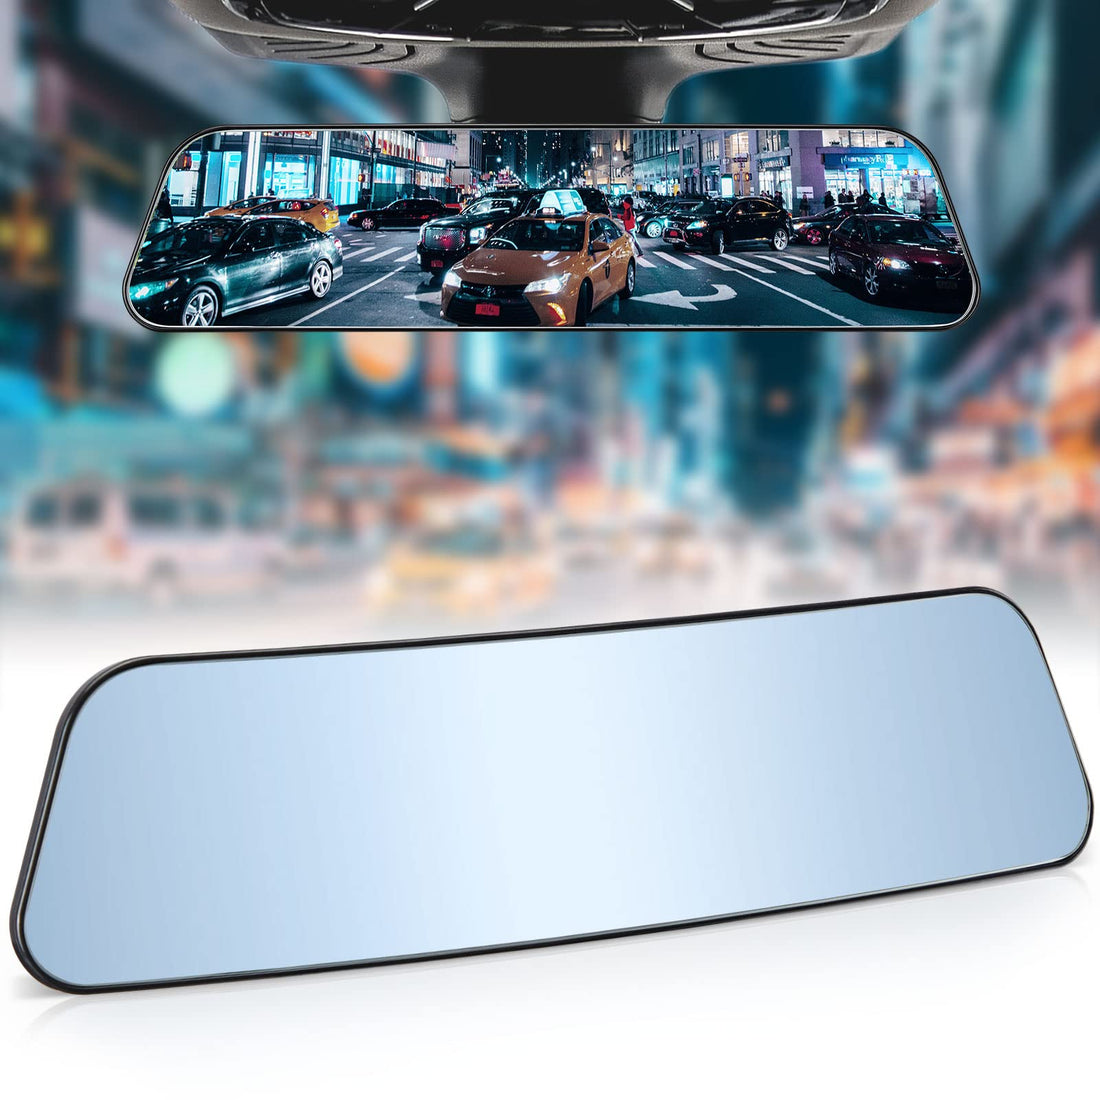 12 Inch Panoramic Anti-Glare Rearview Mirror, Interior Clip-on Wide Angle Convex Universal Rear View Mirror for SUV Trucks -Blue